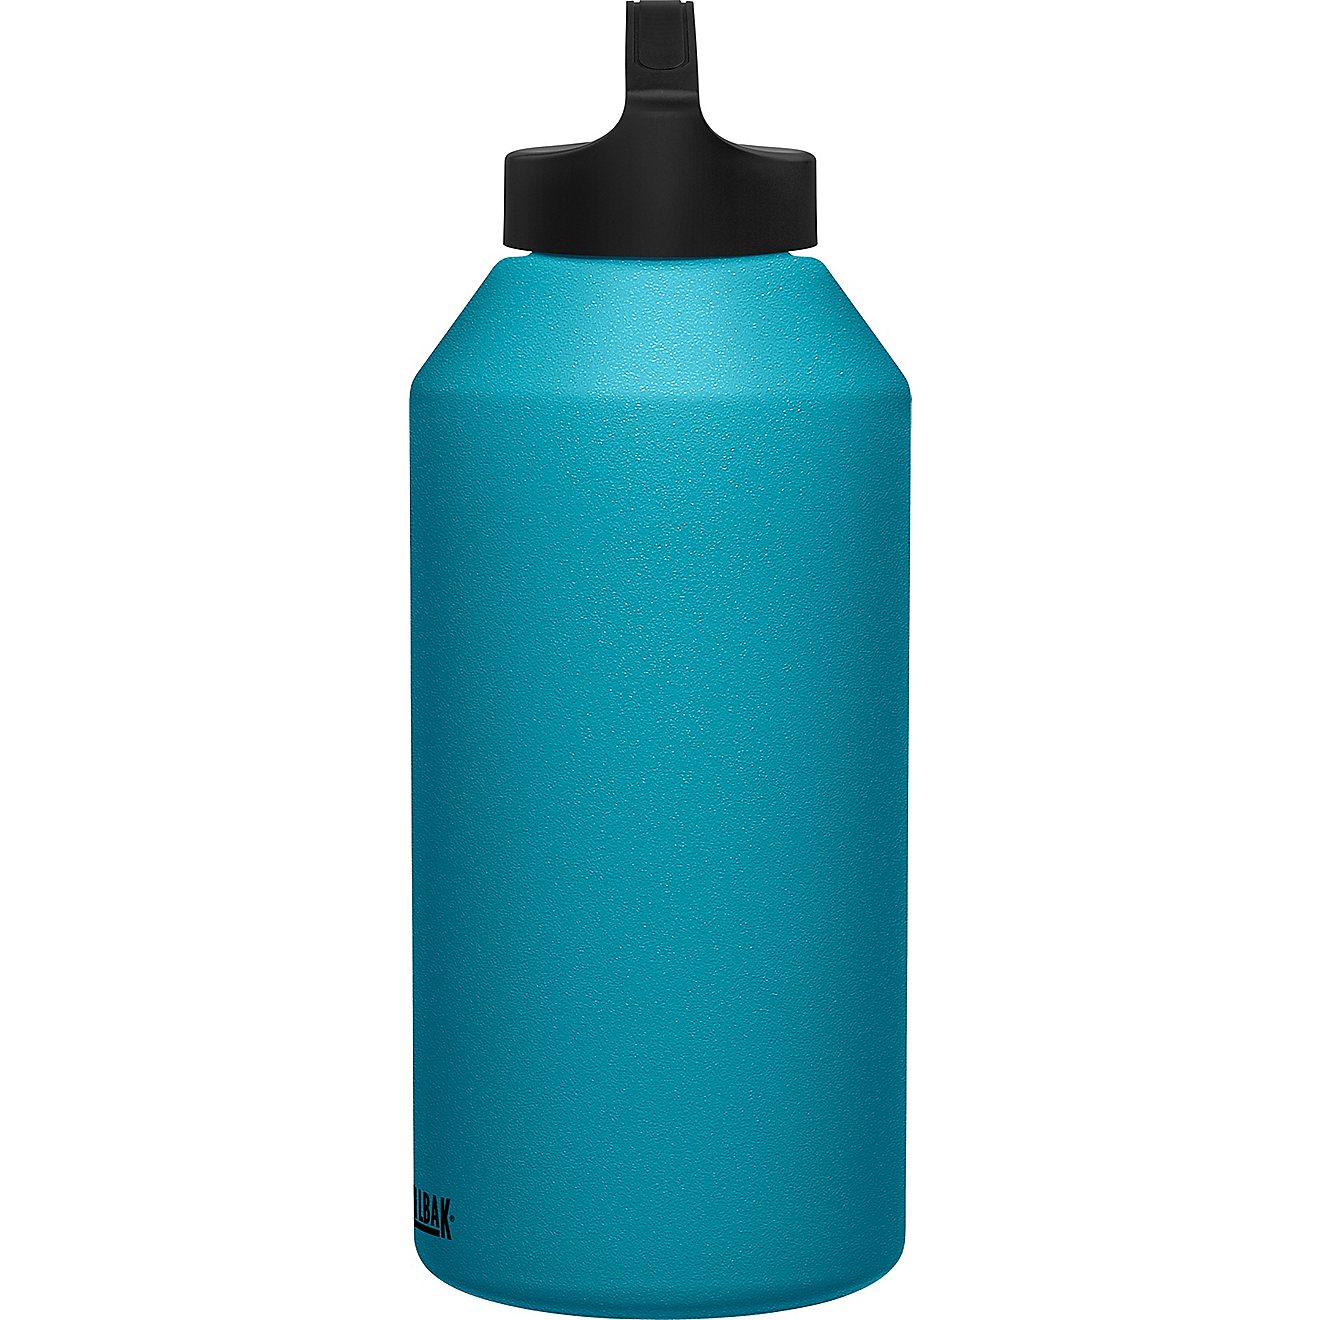 CamelBak Carry Cap 64 oz Insulated Stainless Steel Water Bottle                                                                  - view number 2